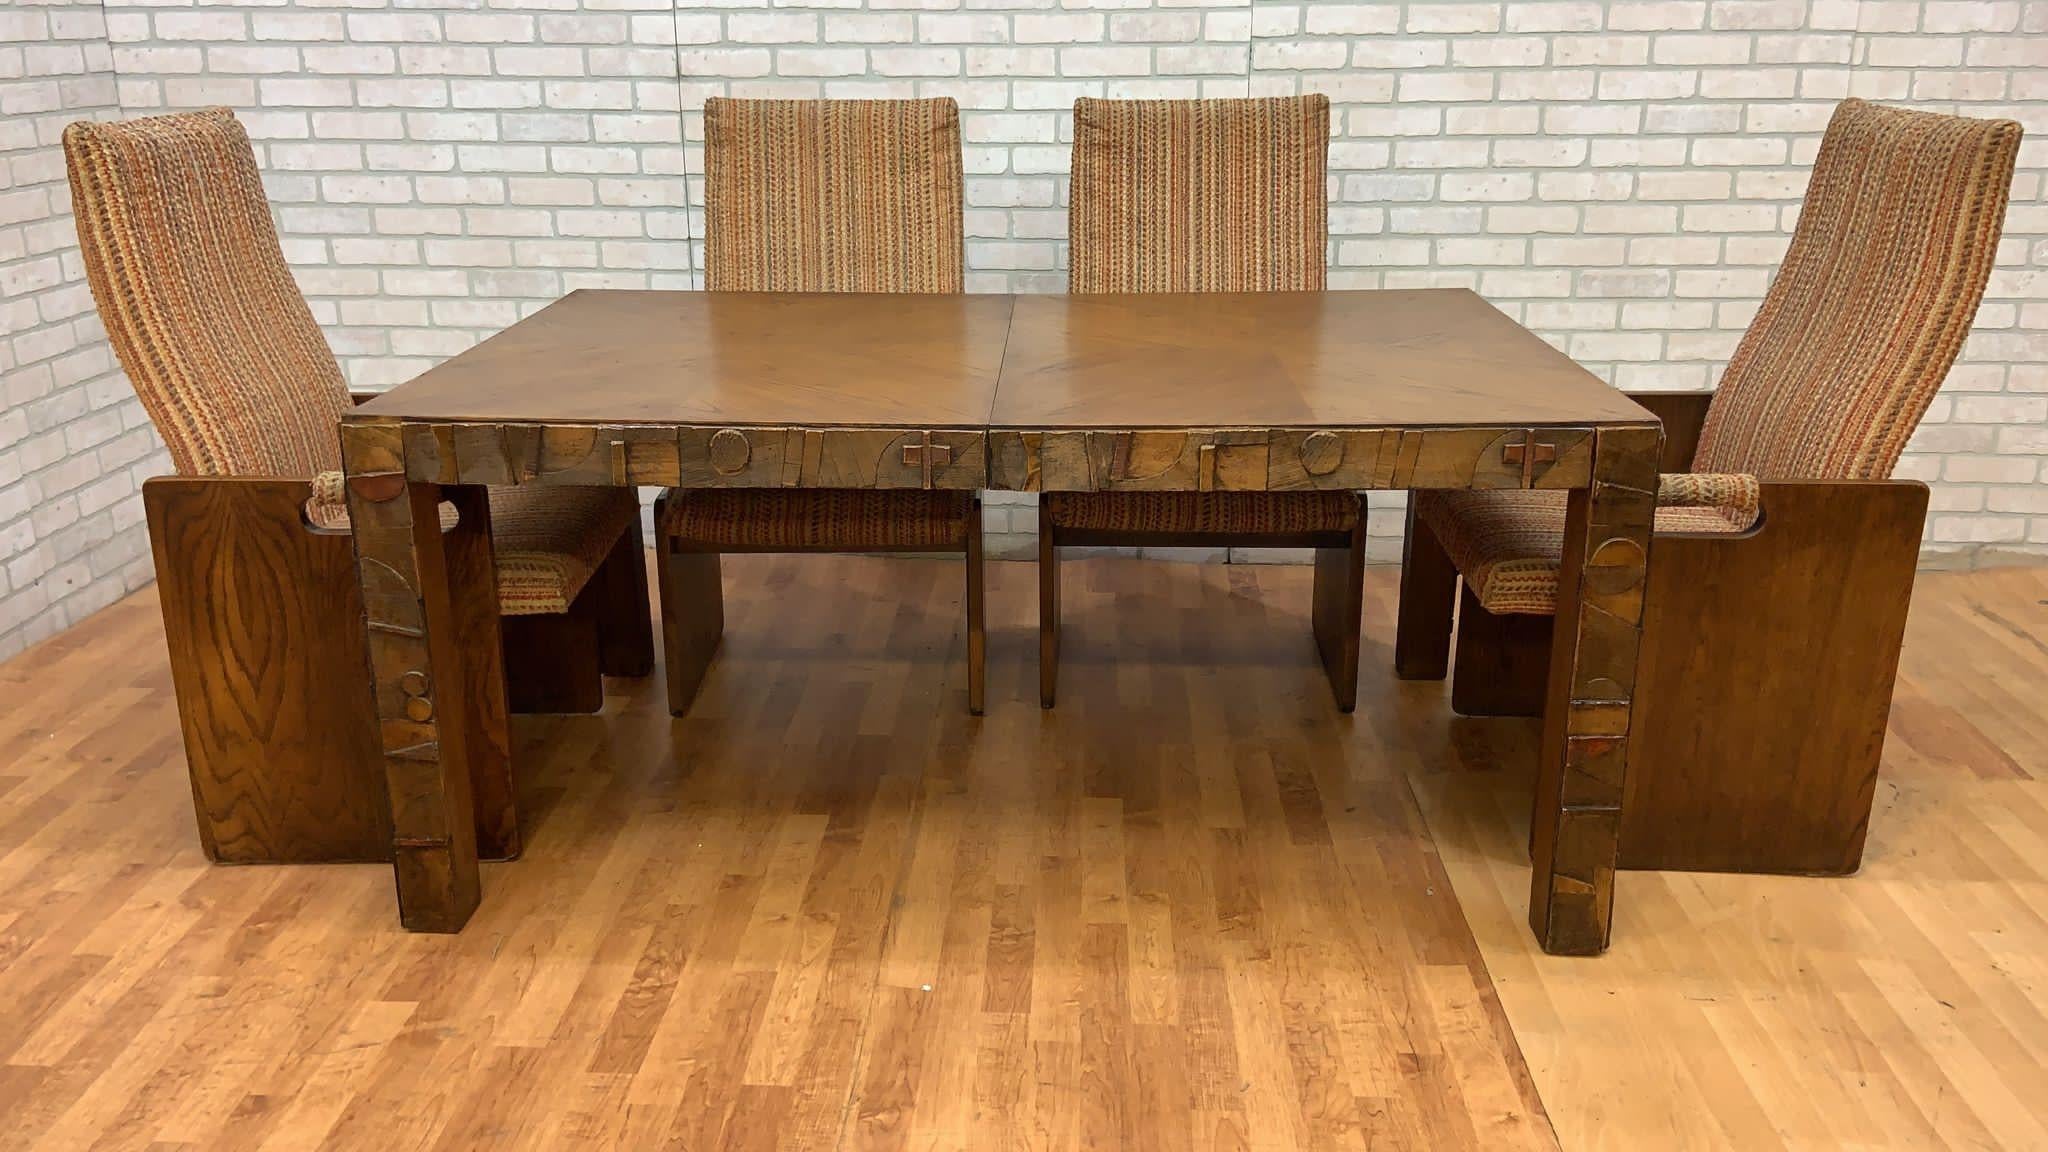 Mid Century Modern Lane Brutalist Paul Evans Style High Back Chair Dining Set - Set of 7

This amazing Lane Brutalist Dining Set in the style of Paul Evans is the perfect addition to any dining area in a Mid-Century home. This set comes with two (2)